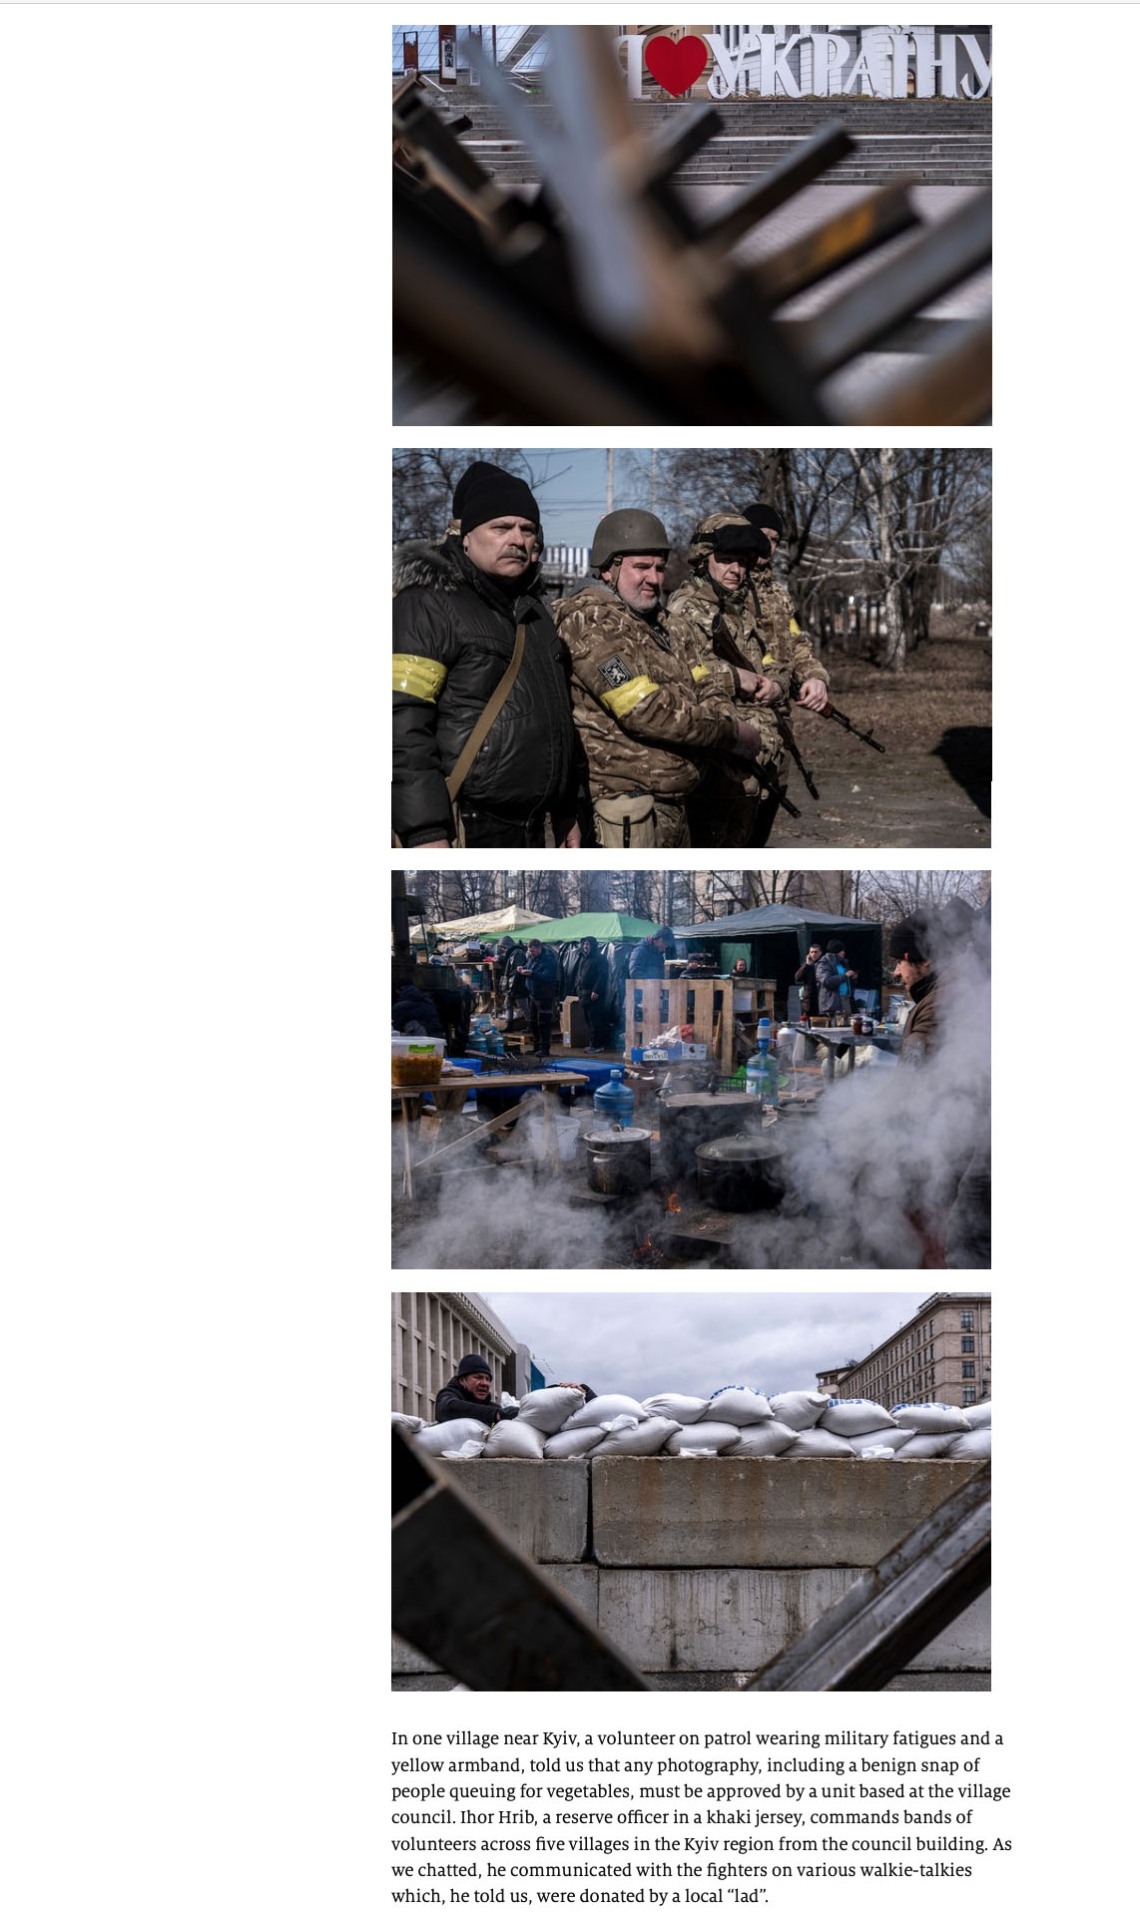 Photos by Ron Haviv / VII of older men in Ukraine volunteering for the Ukrainian military to look for Russian saboteurs, in The Economist 1843 magazine, March 4, 2022.